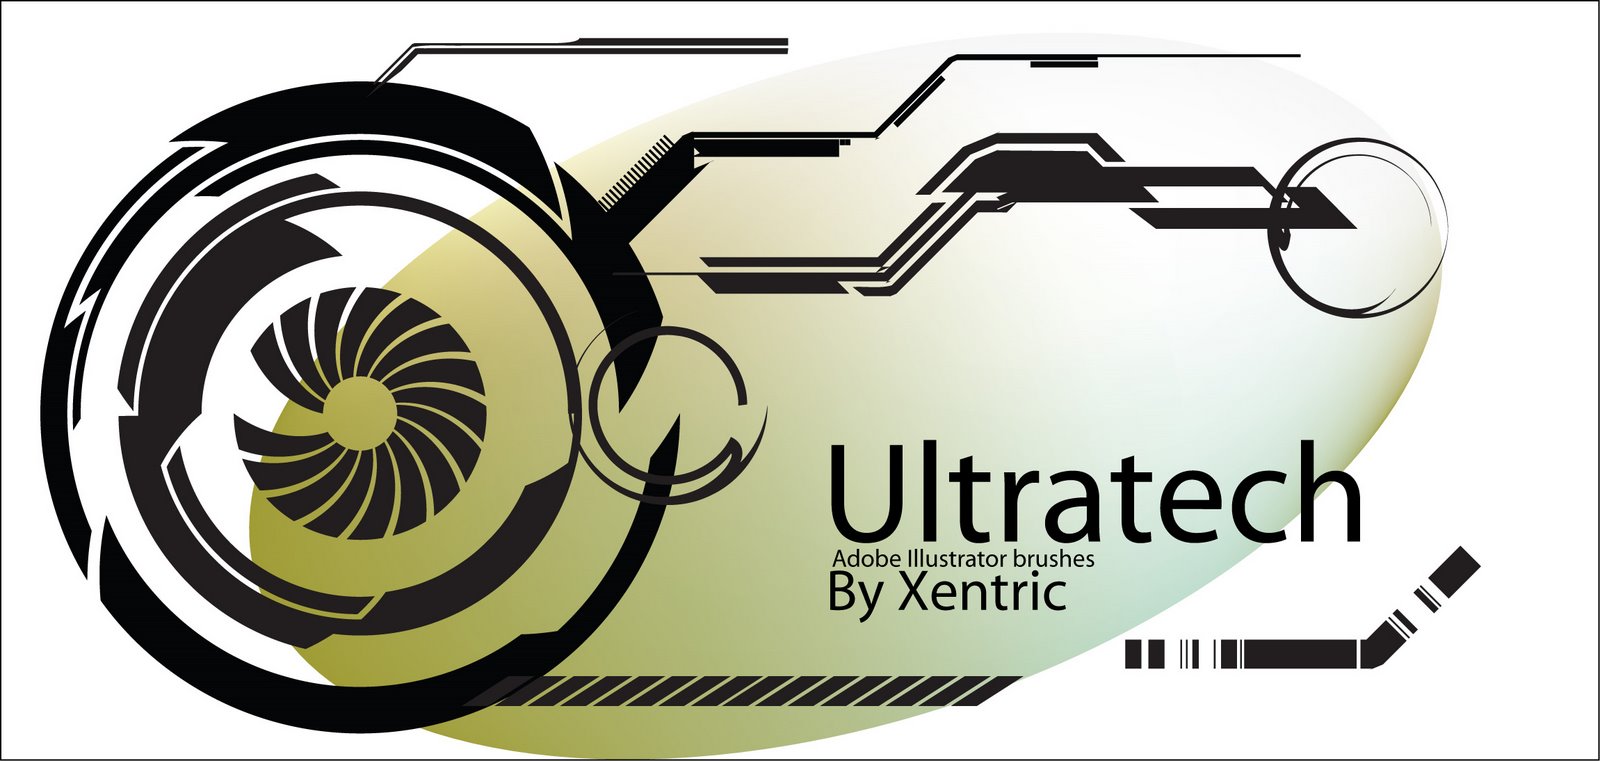 [Ultratech_Brushes_by_Xentric.jpg]